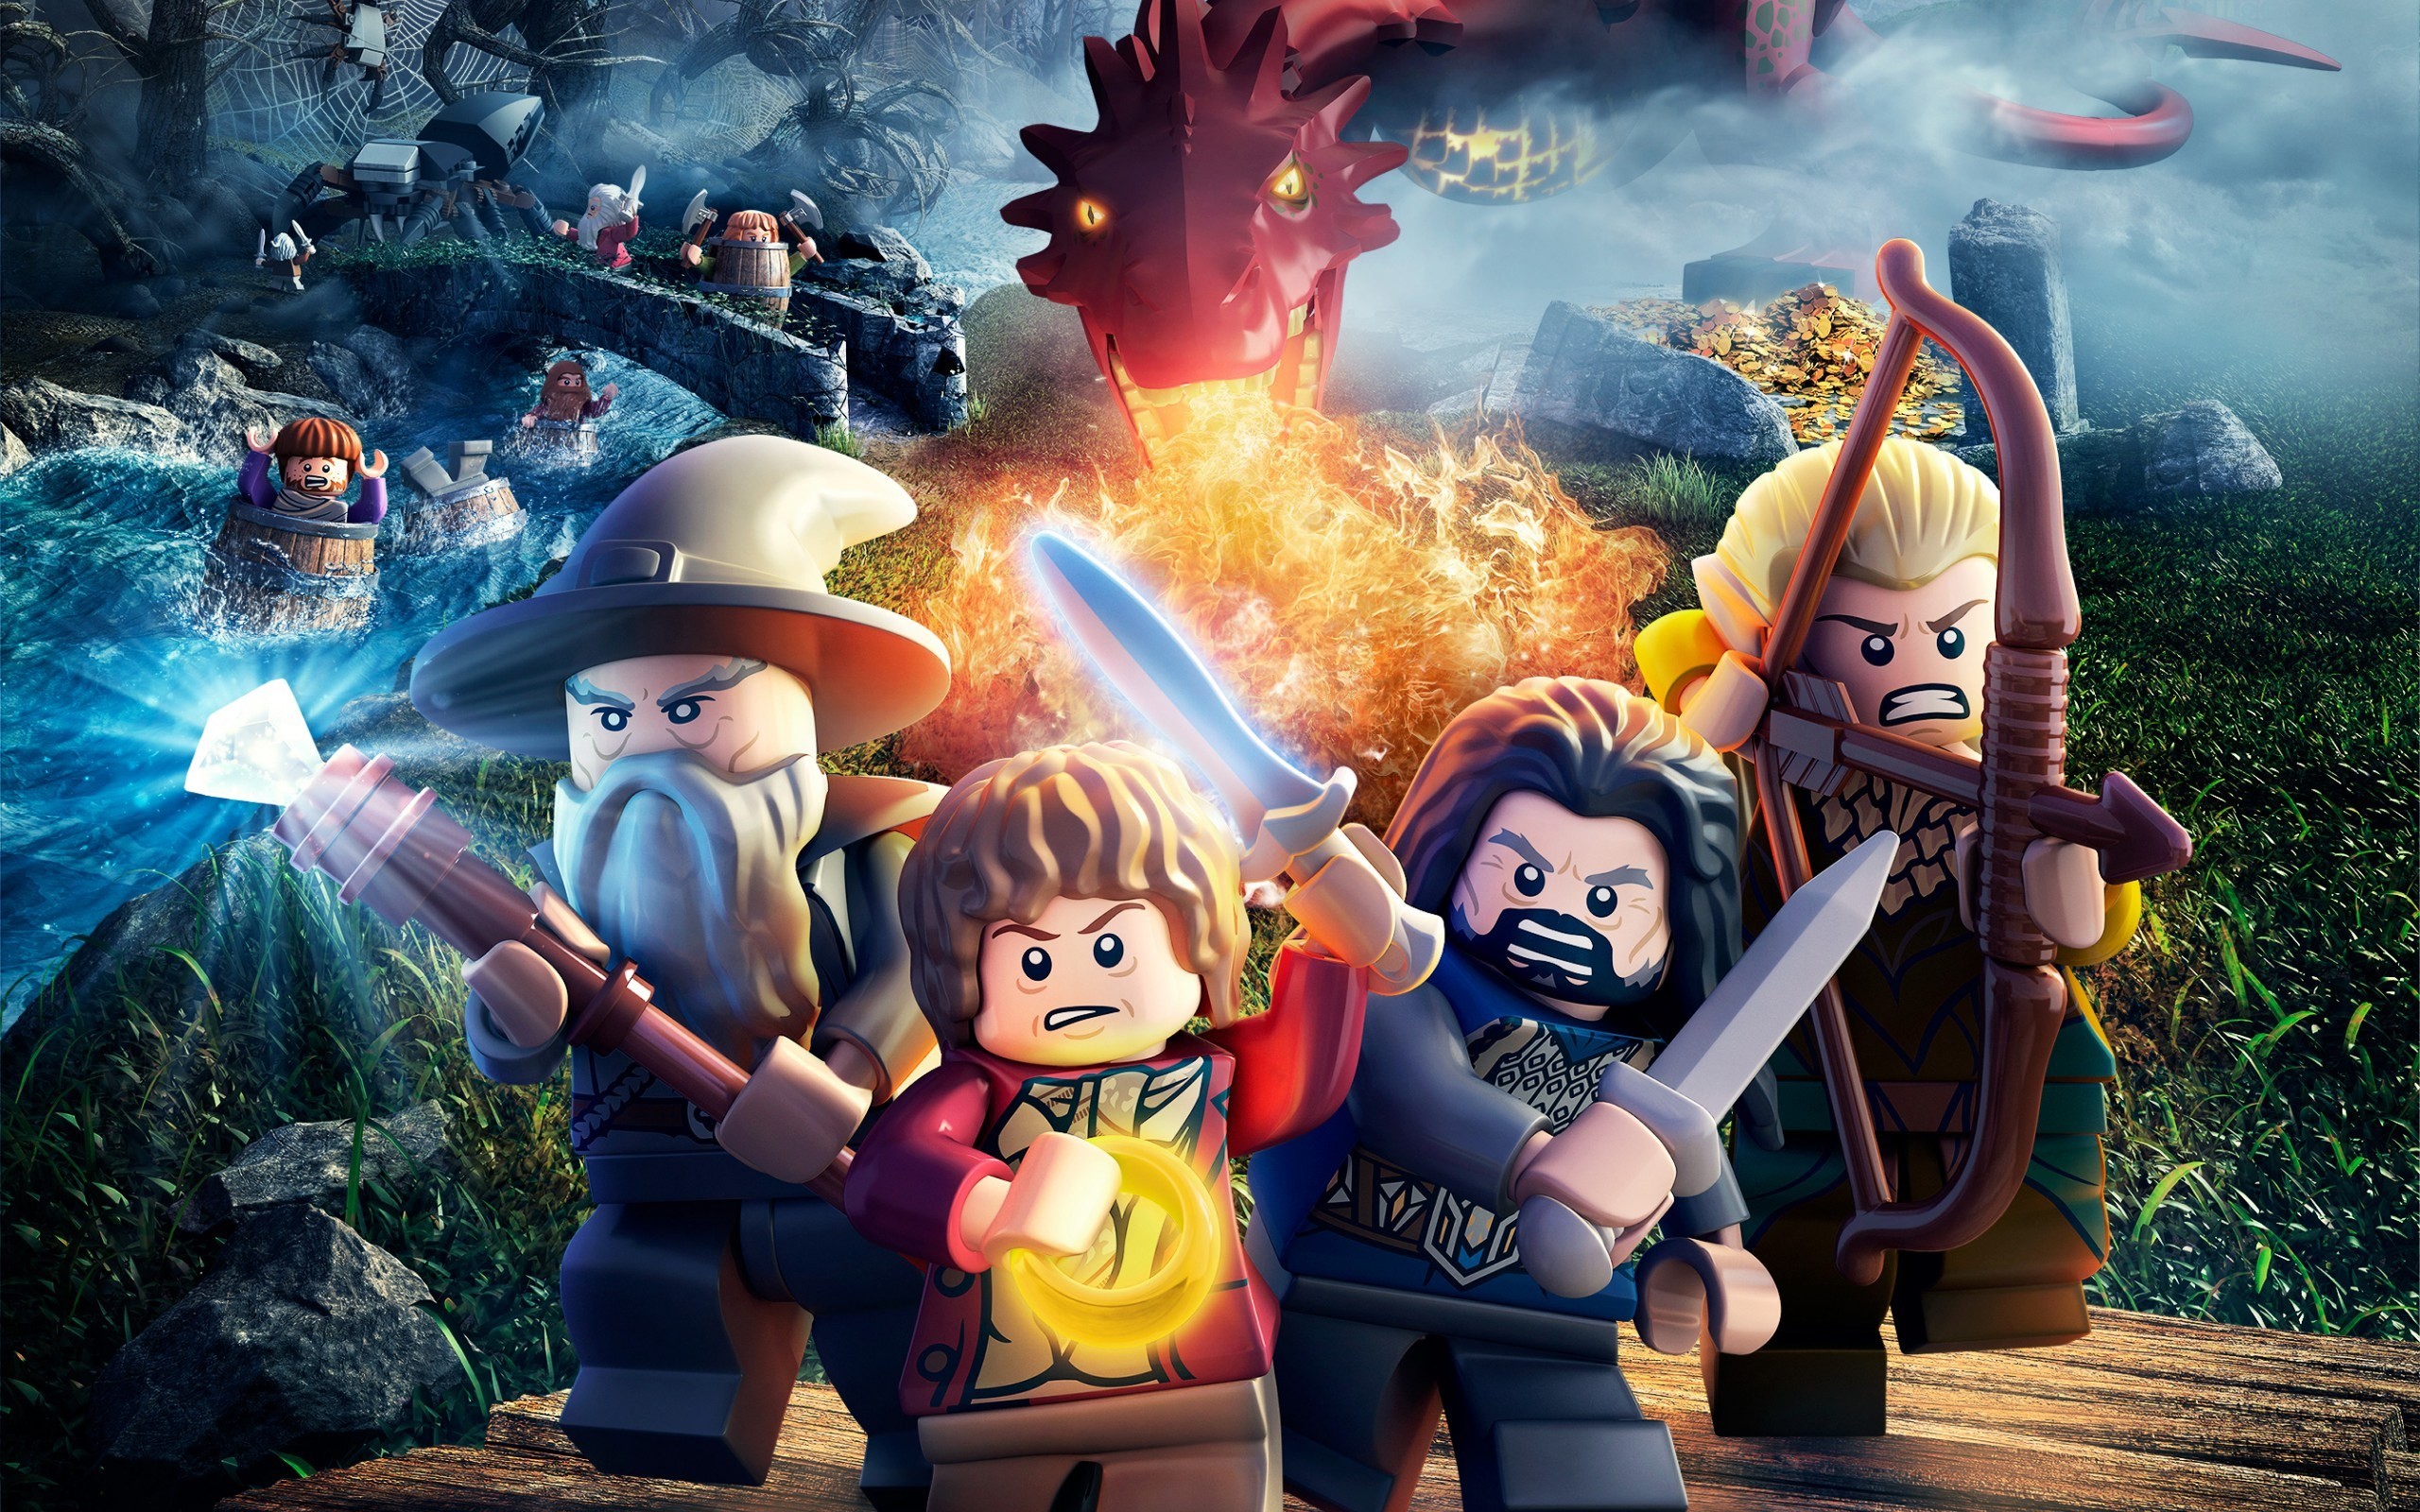 2560x1600 #1670898, lego the hobbit category - wallpapers free lego the hobbit